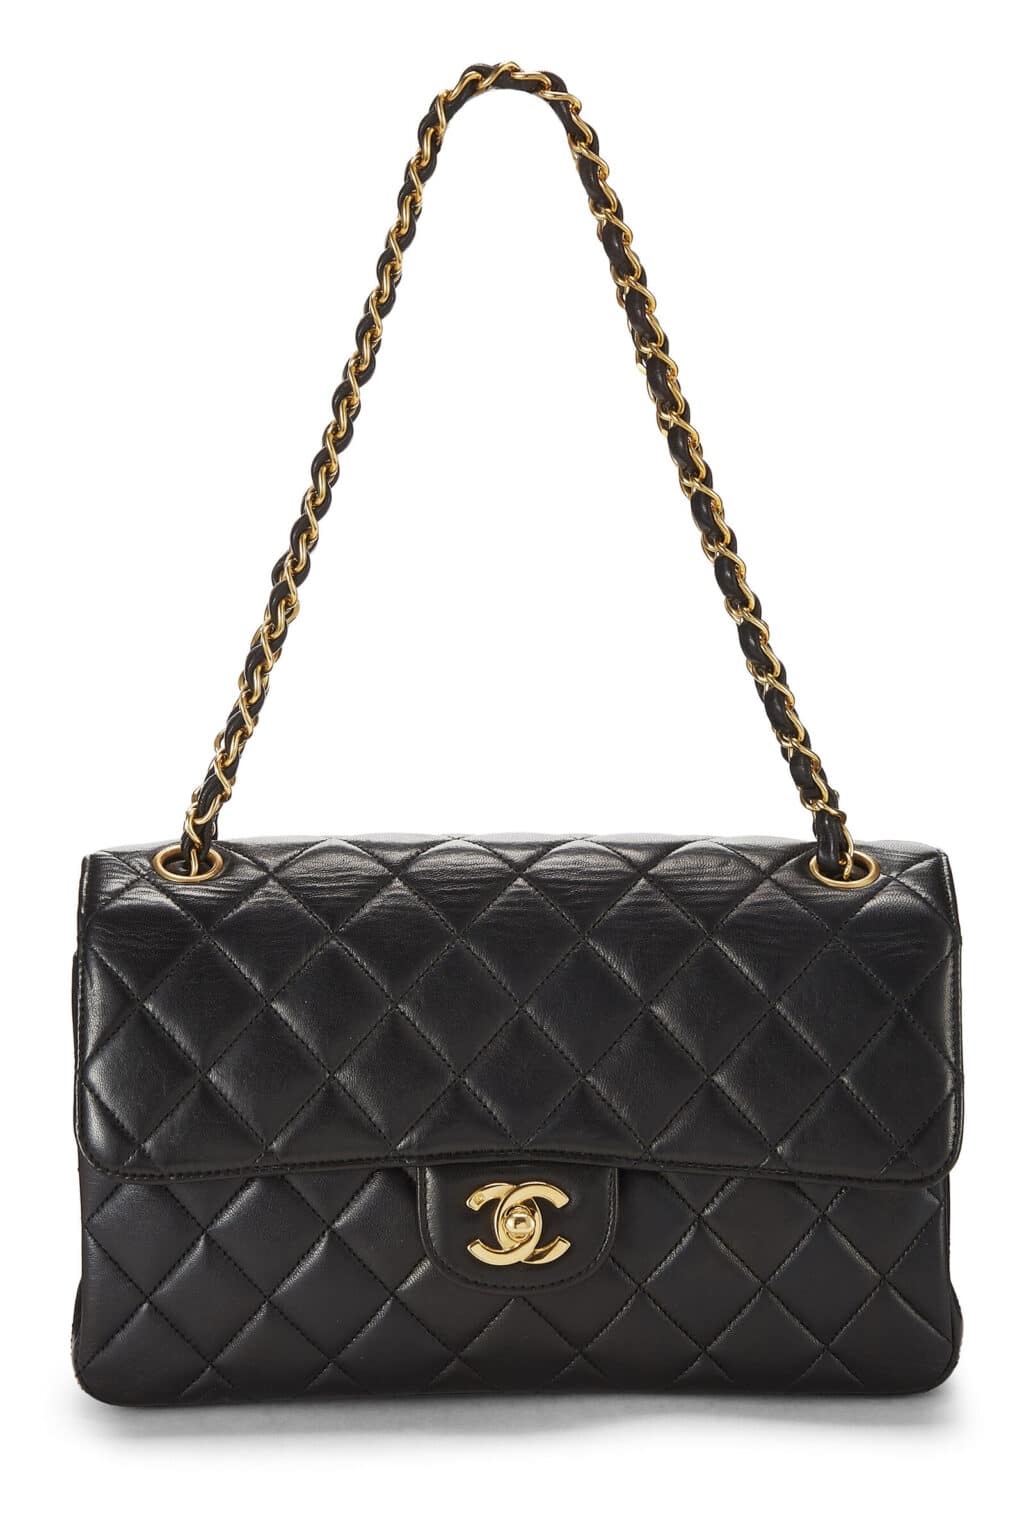 CHANEL BLACK QUILTED LAMBSKIN DOUBLE SIDED CLASSIC FLAP MEDIUM